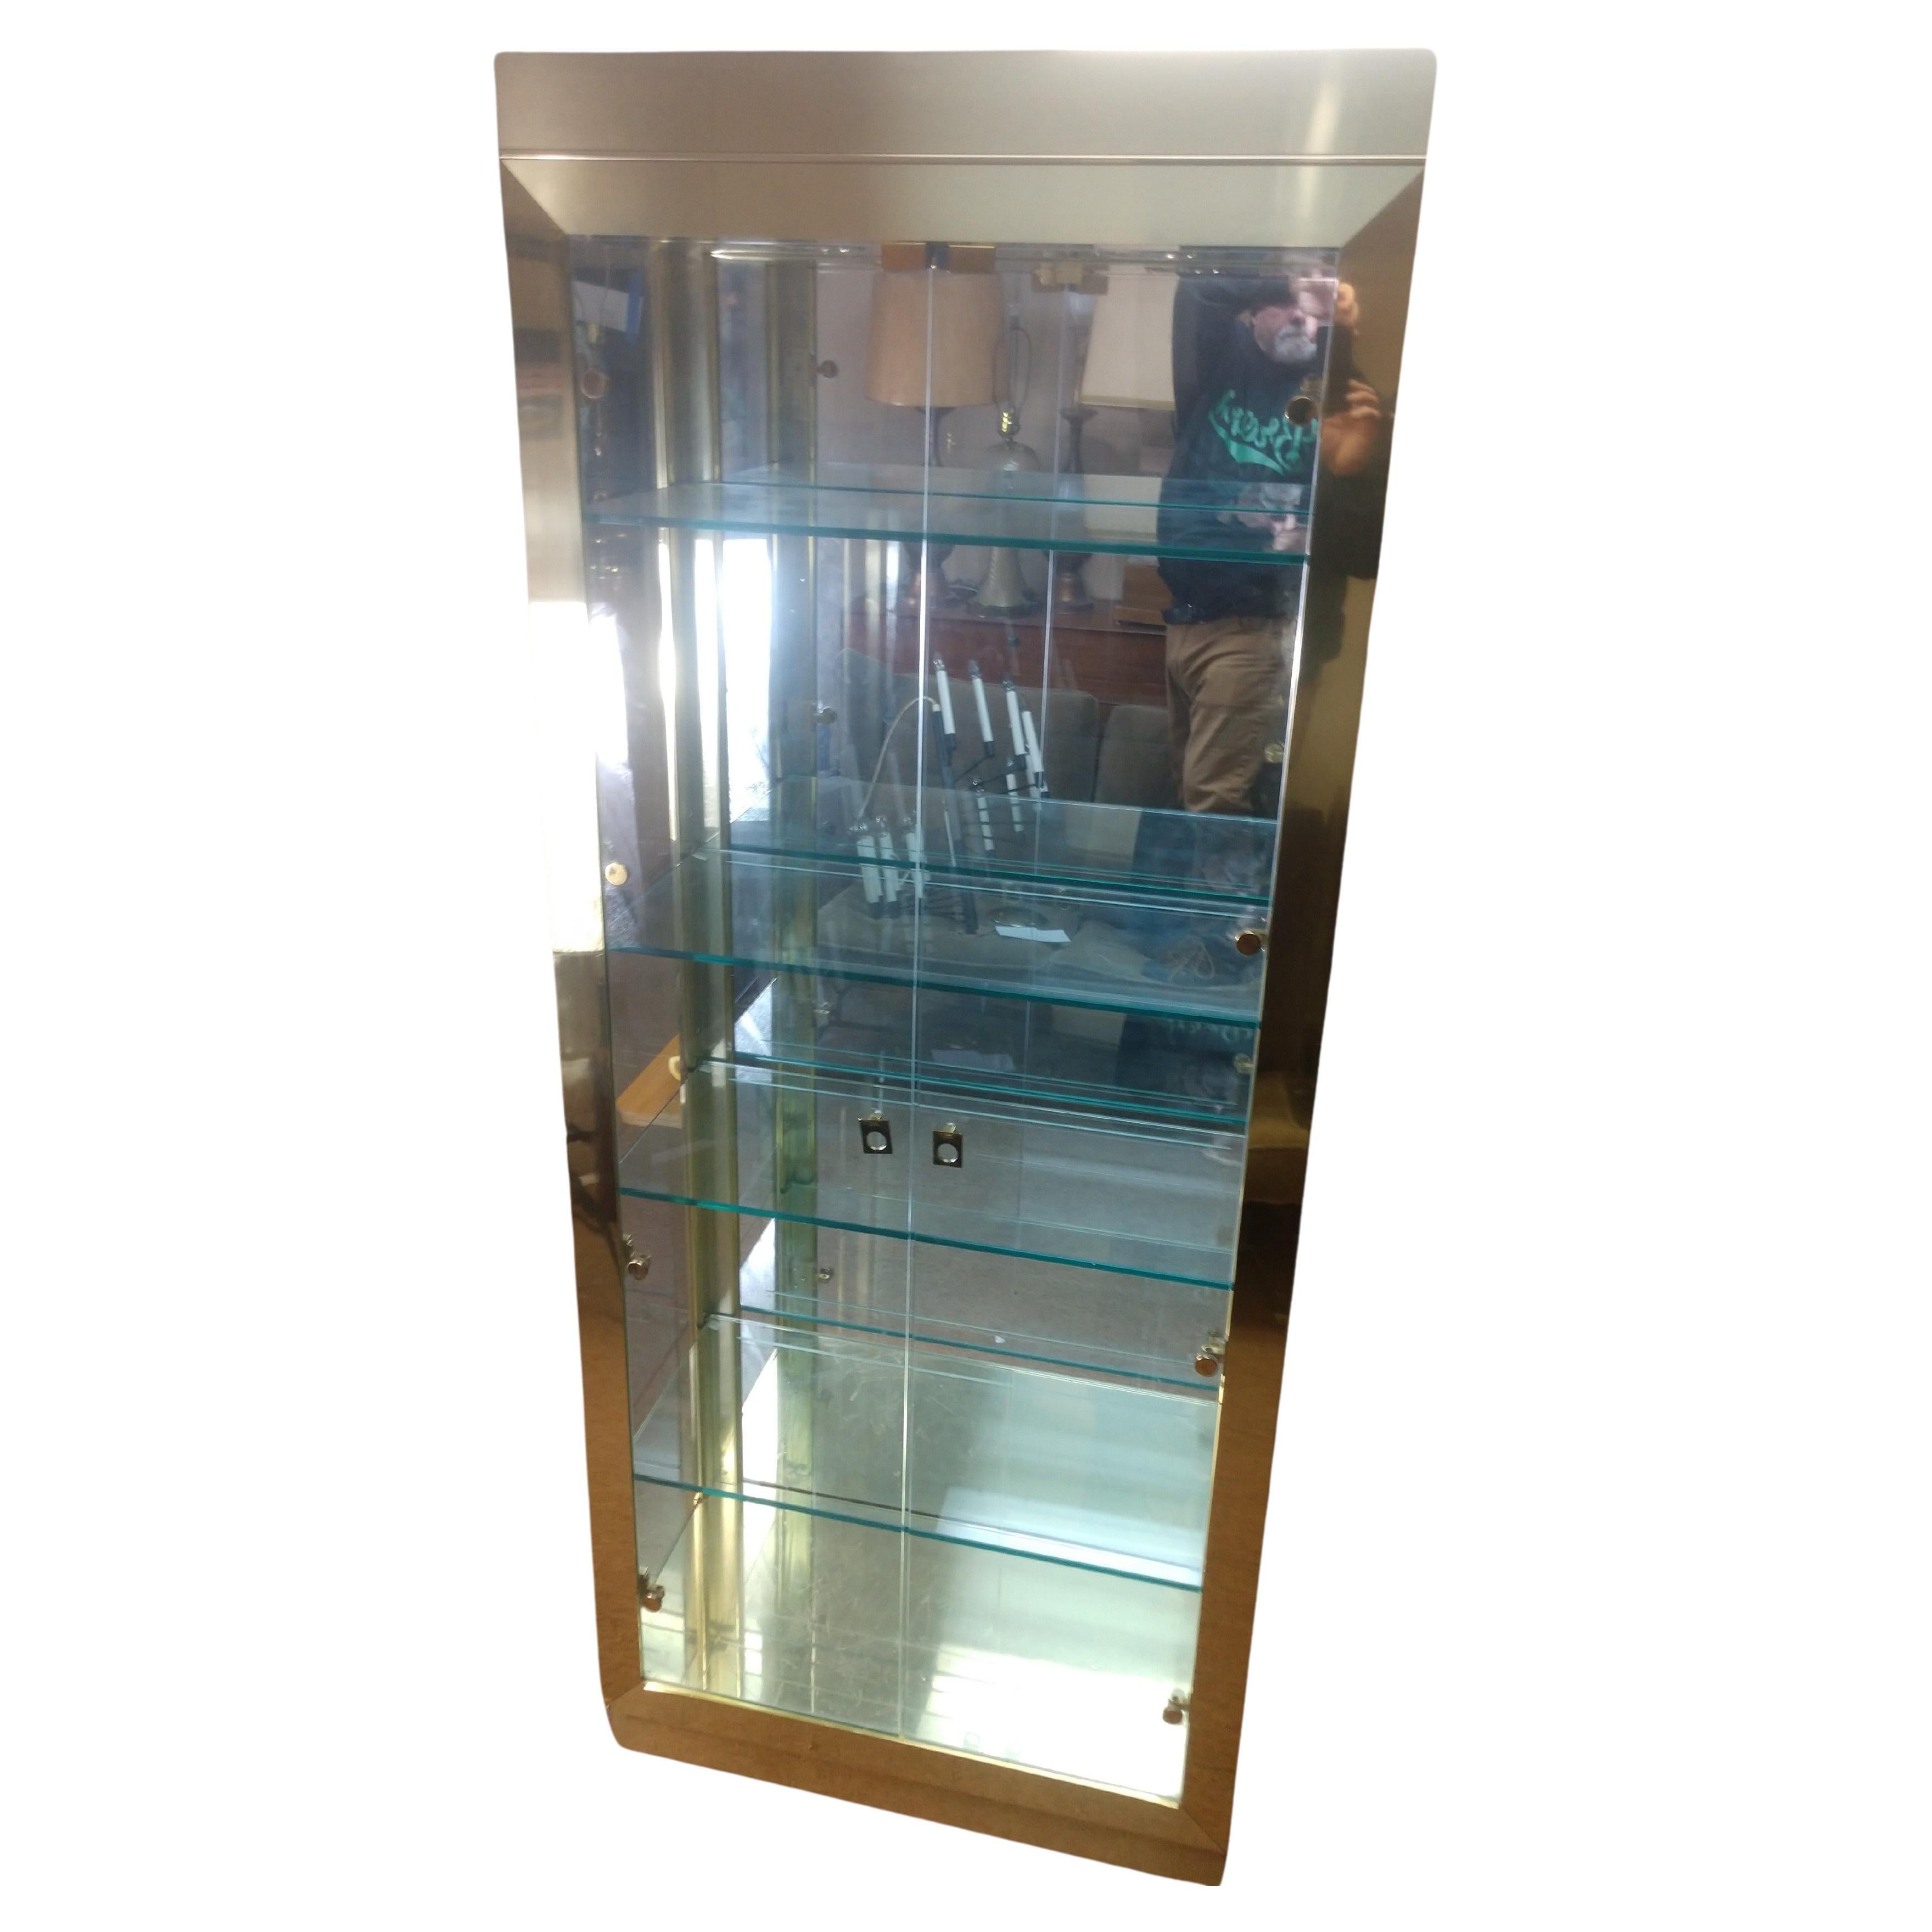 Fabulous brass and glass tall showcase with 4 thick glass shelves etched for showing plates. Shelves are adjustable. Two glass doors each hung on 4 hinges. In near perfect condition the exception being a corner on bottom left which has a minor